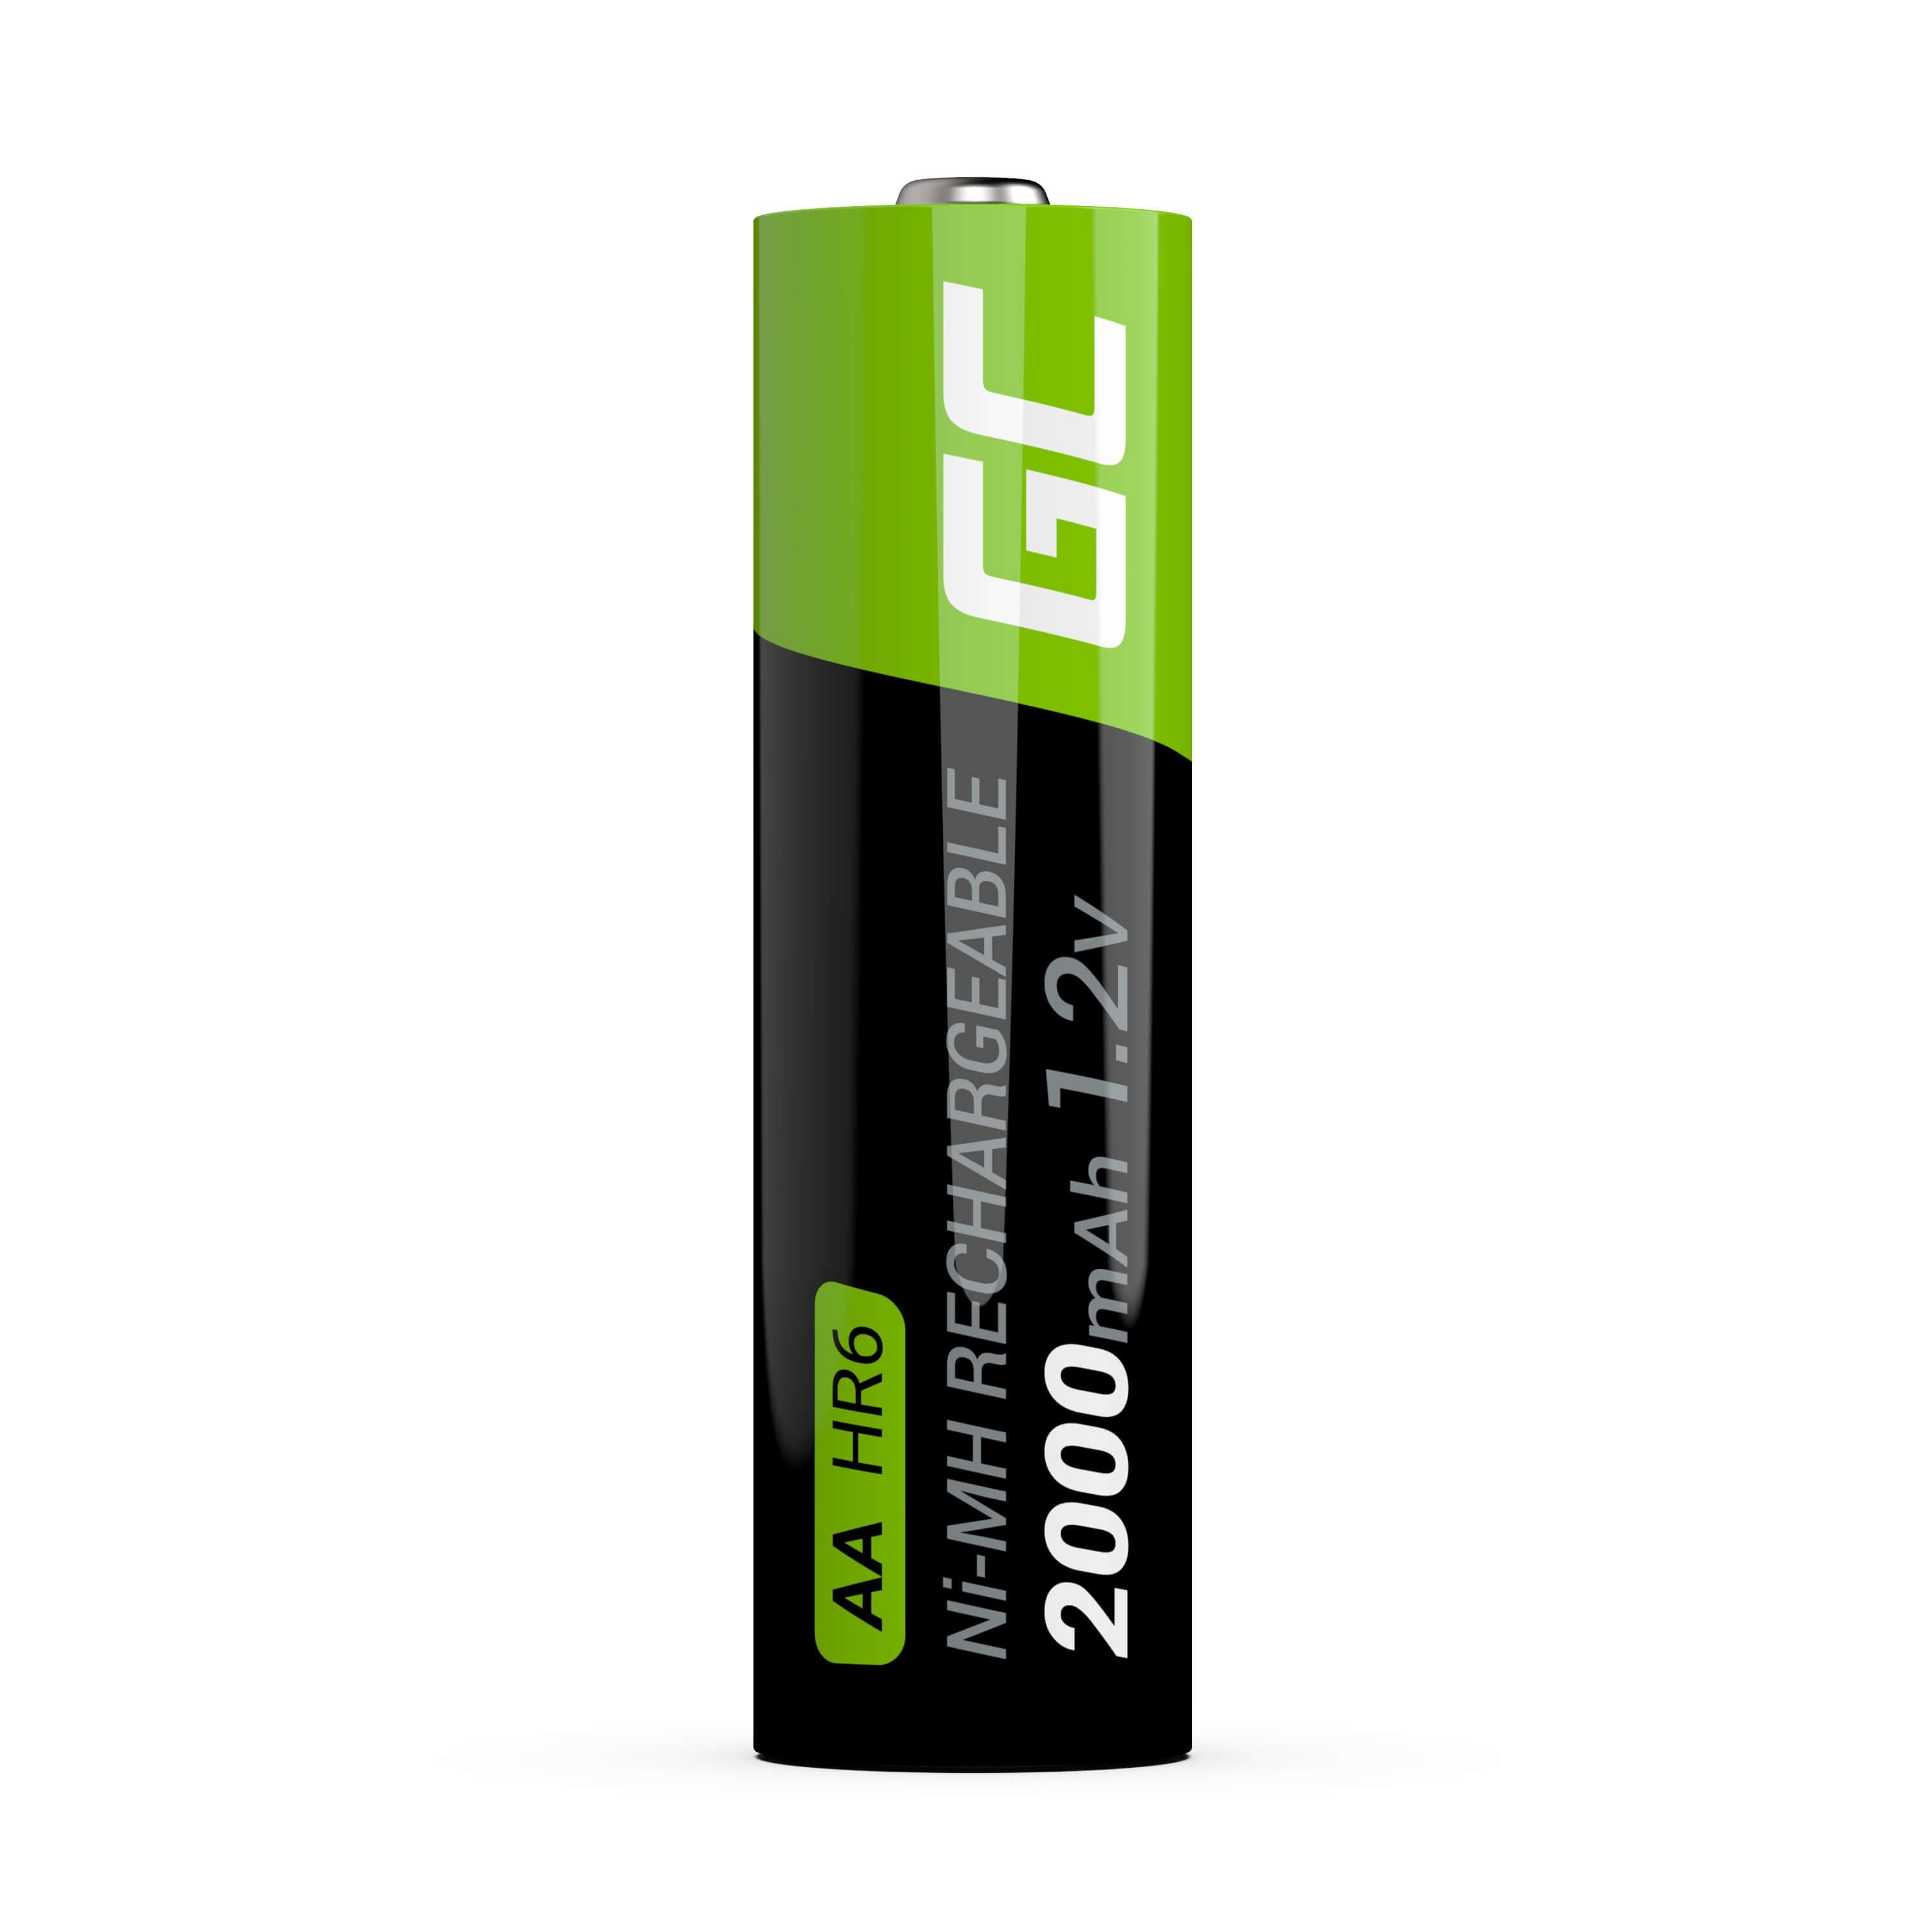 Green Cell GR02 household battery Rechargeable battery AA Nickel-Metal Hydride (NiMH) 4x AA HR6 2000 mAh_3